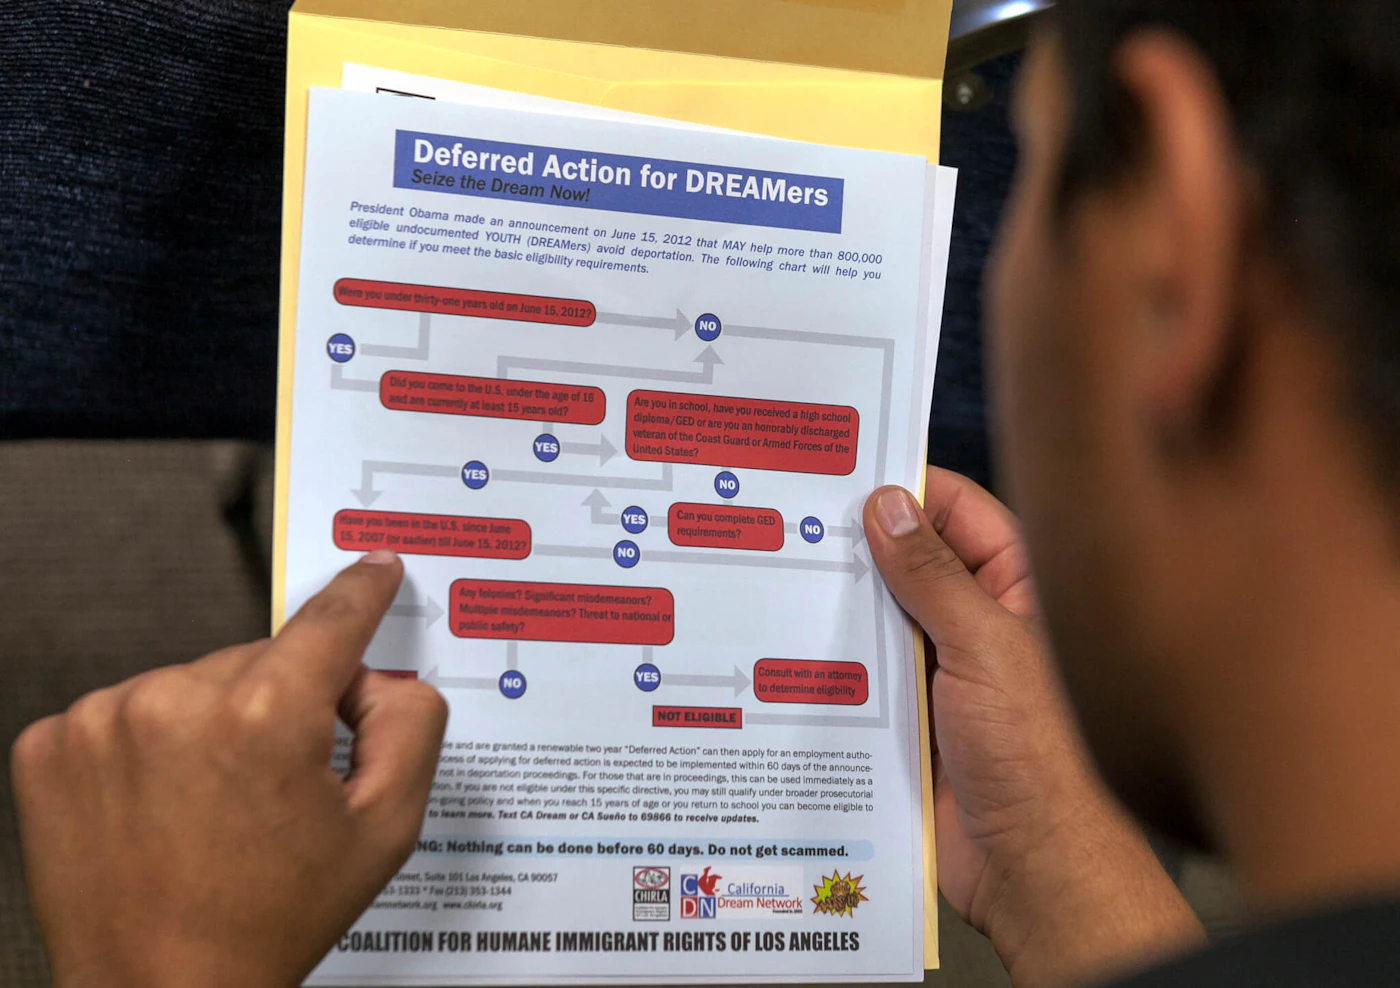 A legal immigrant reads a guide of the conditions needed to apply for the so-called 'DREAMers'  Obama program, formally known as Deferred Action for Childhood Arrivals (DACA) at the Coalition for Humane Immigrant Rights, CHIRLA offices in Los Angeles Wednesday, Aug. 15, 2012. Hundreds of thousands of young illegal immigrants scrambled to get papers in order, as the U.S. started accepting applications to allow them to avoid deportation and get a work permit, but not a path to citizenship. (AP Photo/Damian Dovarganes)